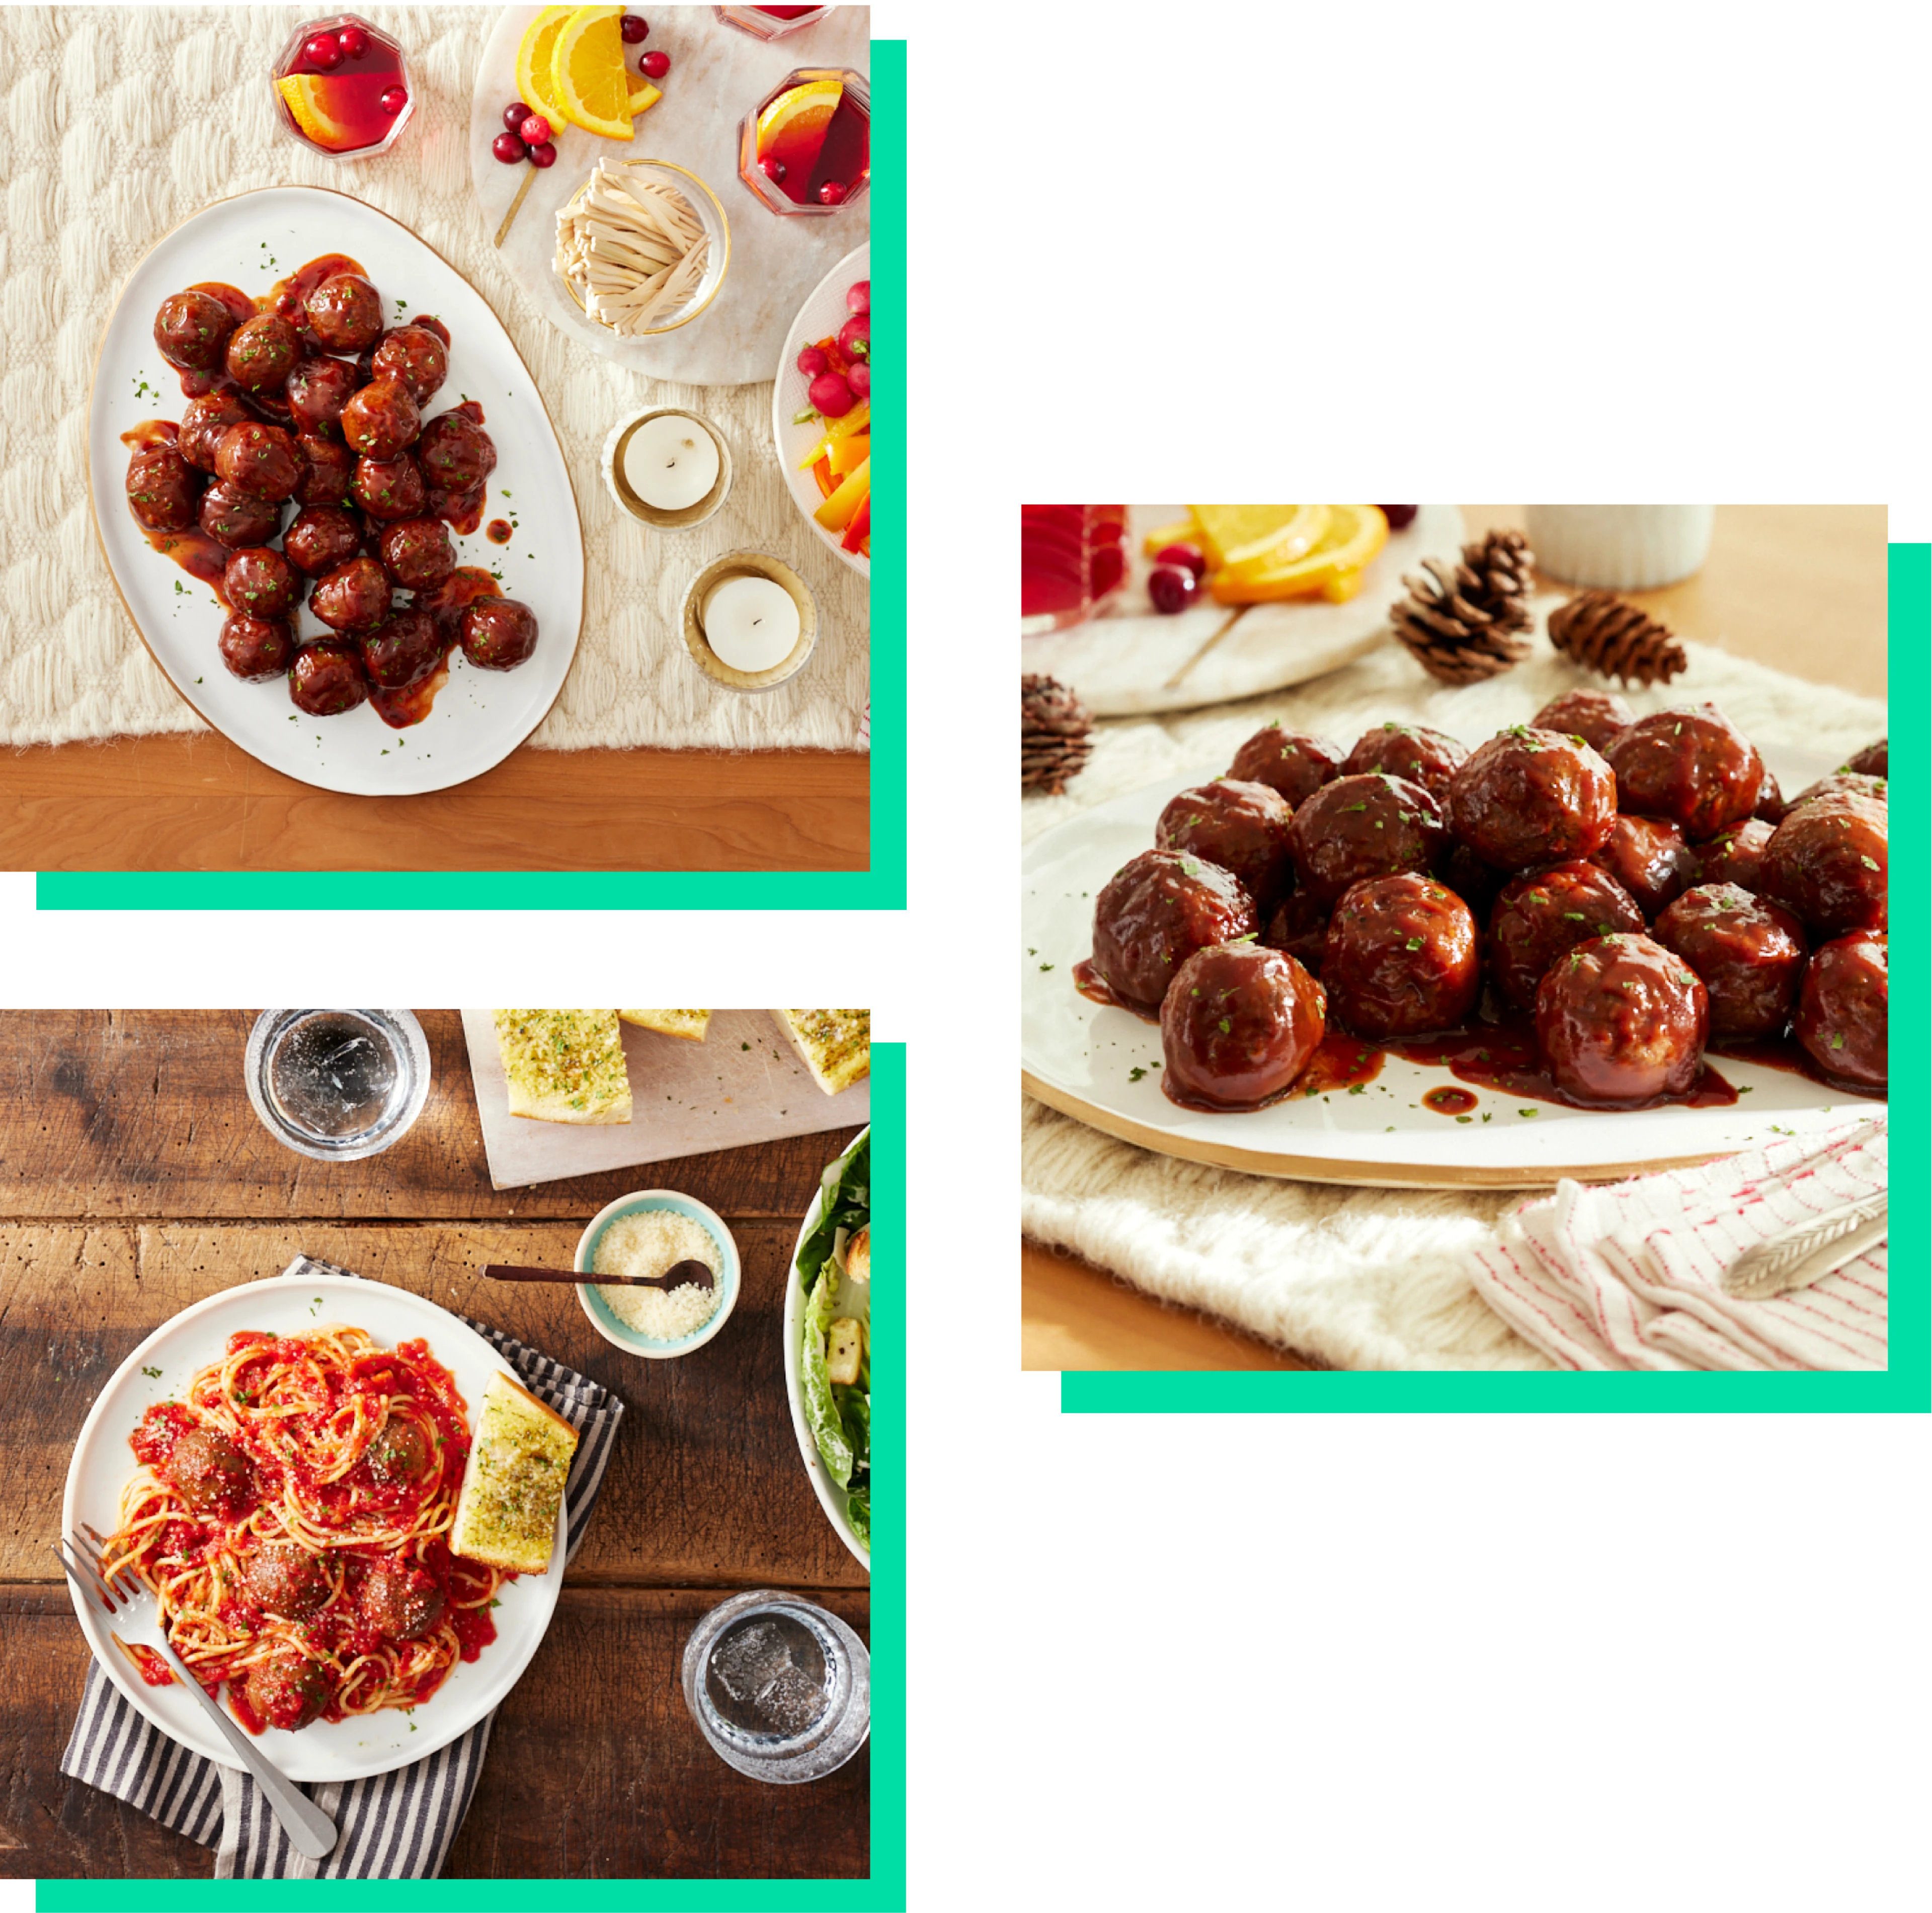 Trio of Impossible meatball images including: plate of meatballs covered in sauce and overhead plate of glazed meatballs and plate of spaghetti and meatballs covered in cheese